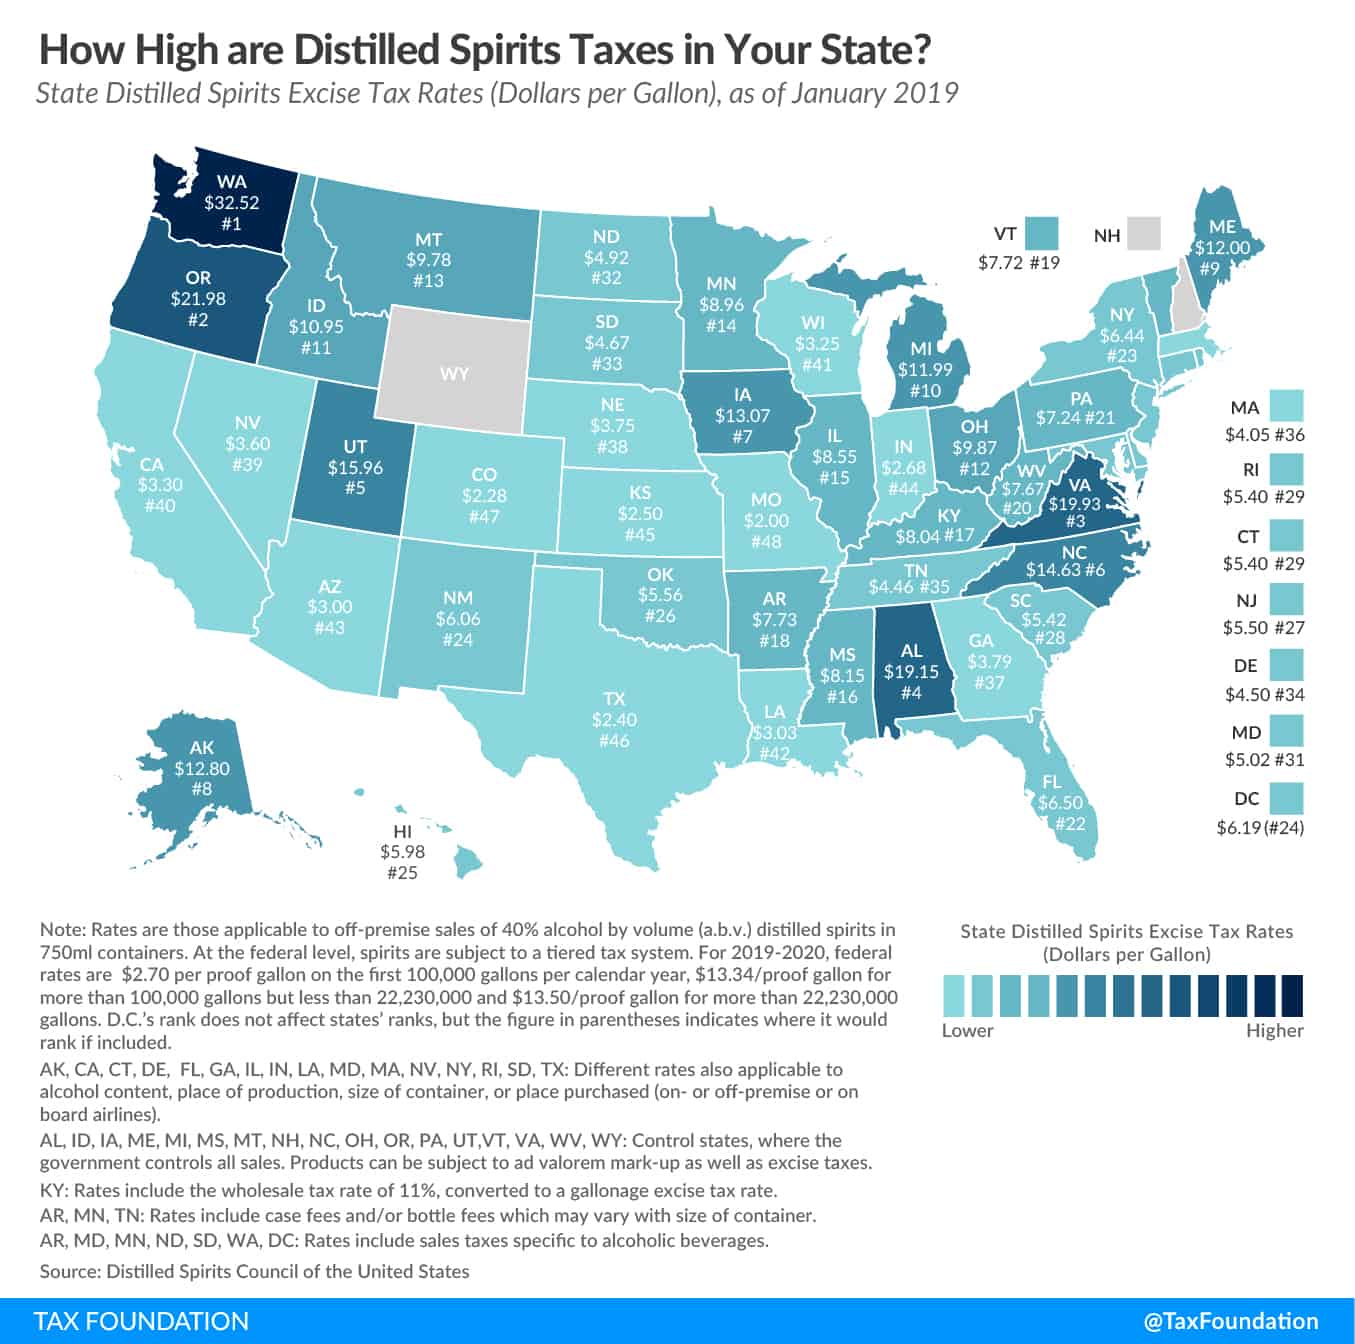 How High are Distilled Spirits Taxes in Your State?